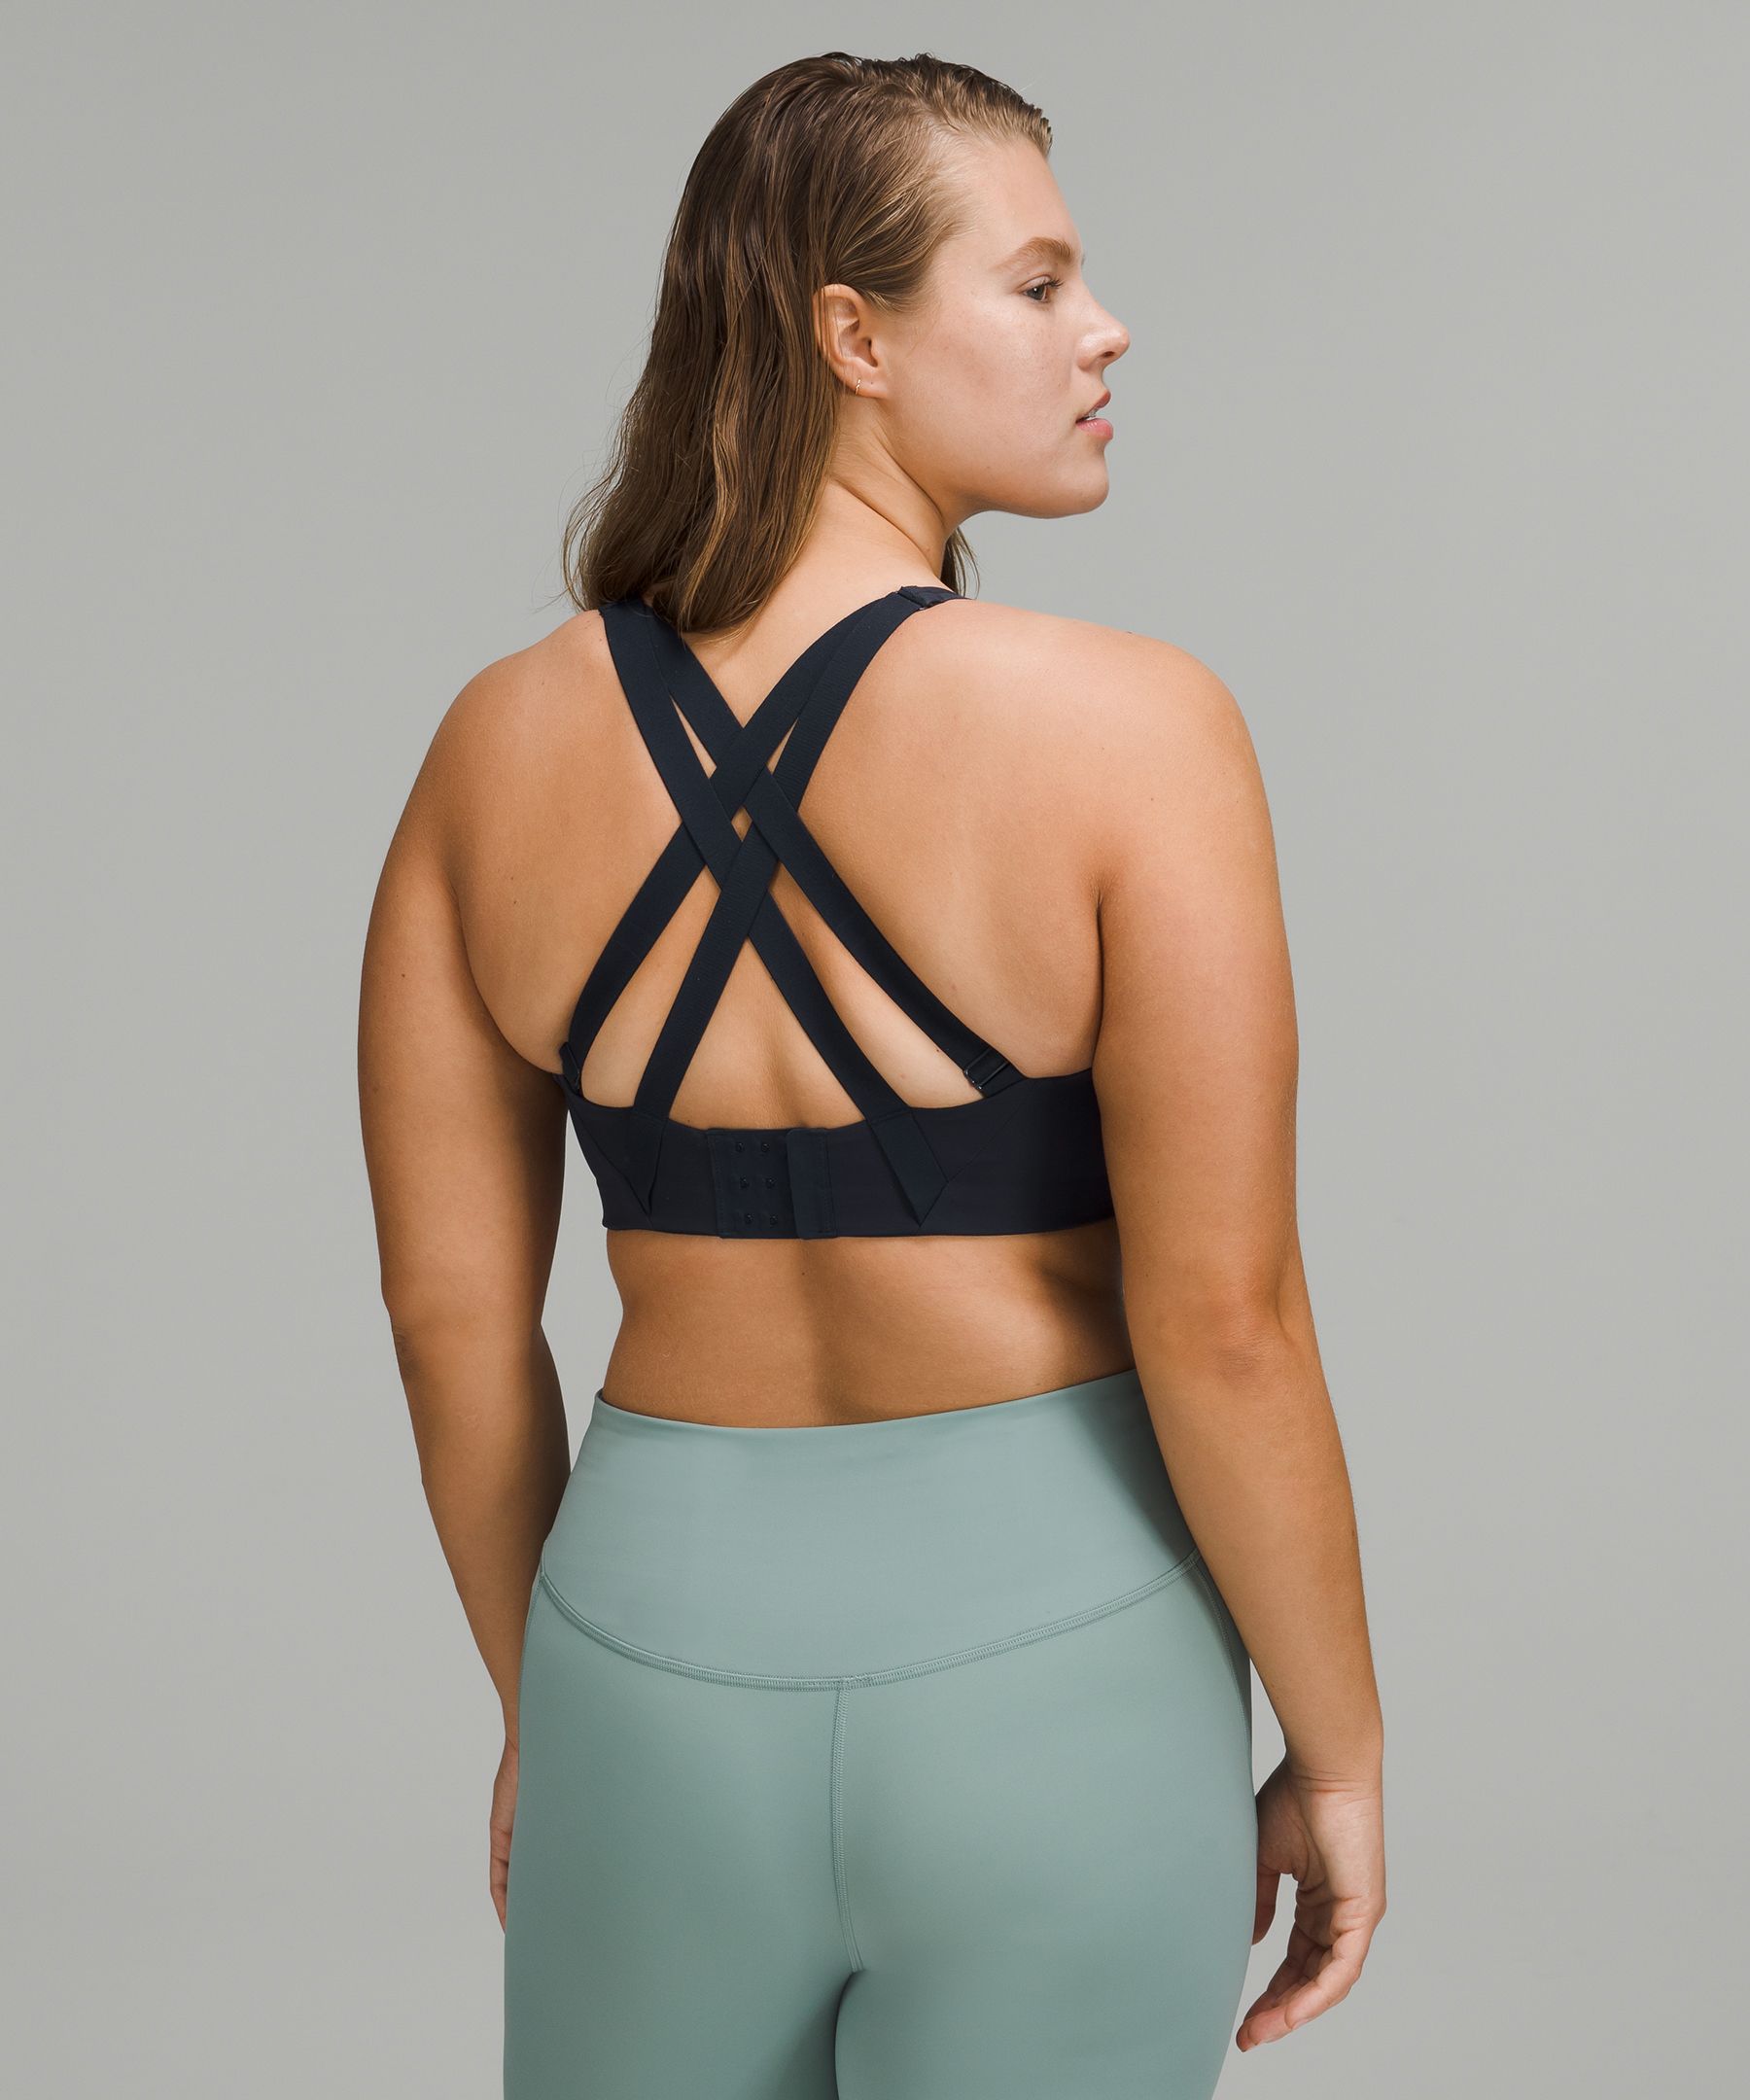 High Support & High Impact Sports Bras